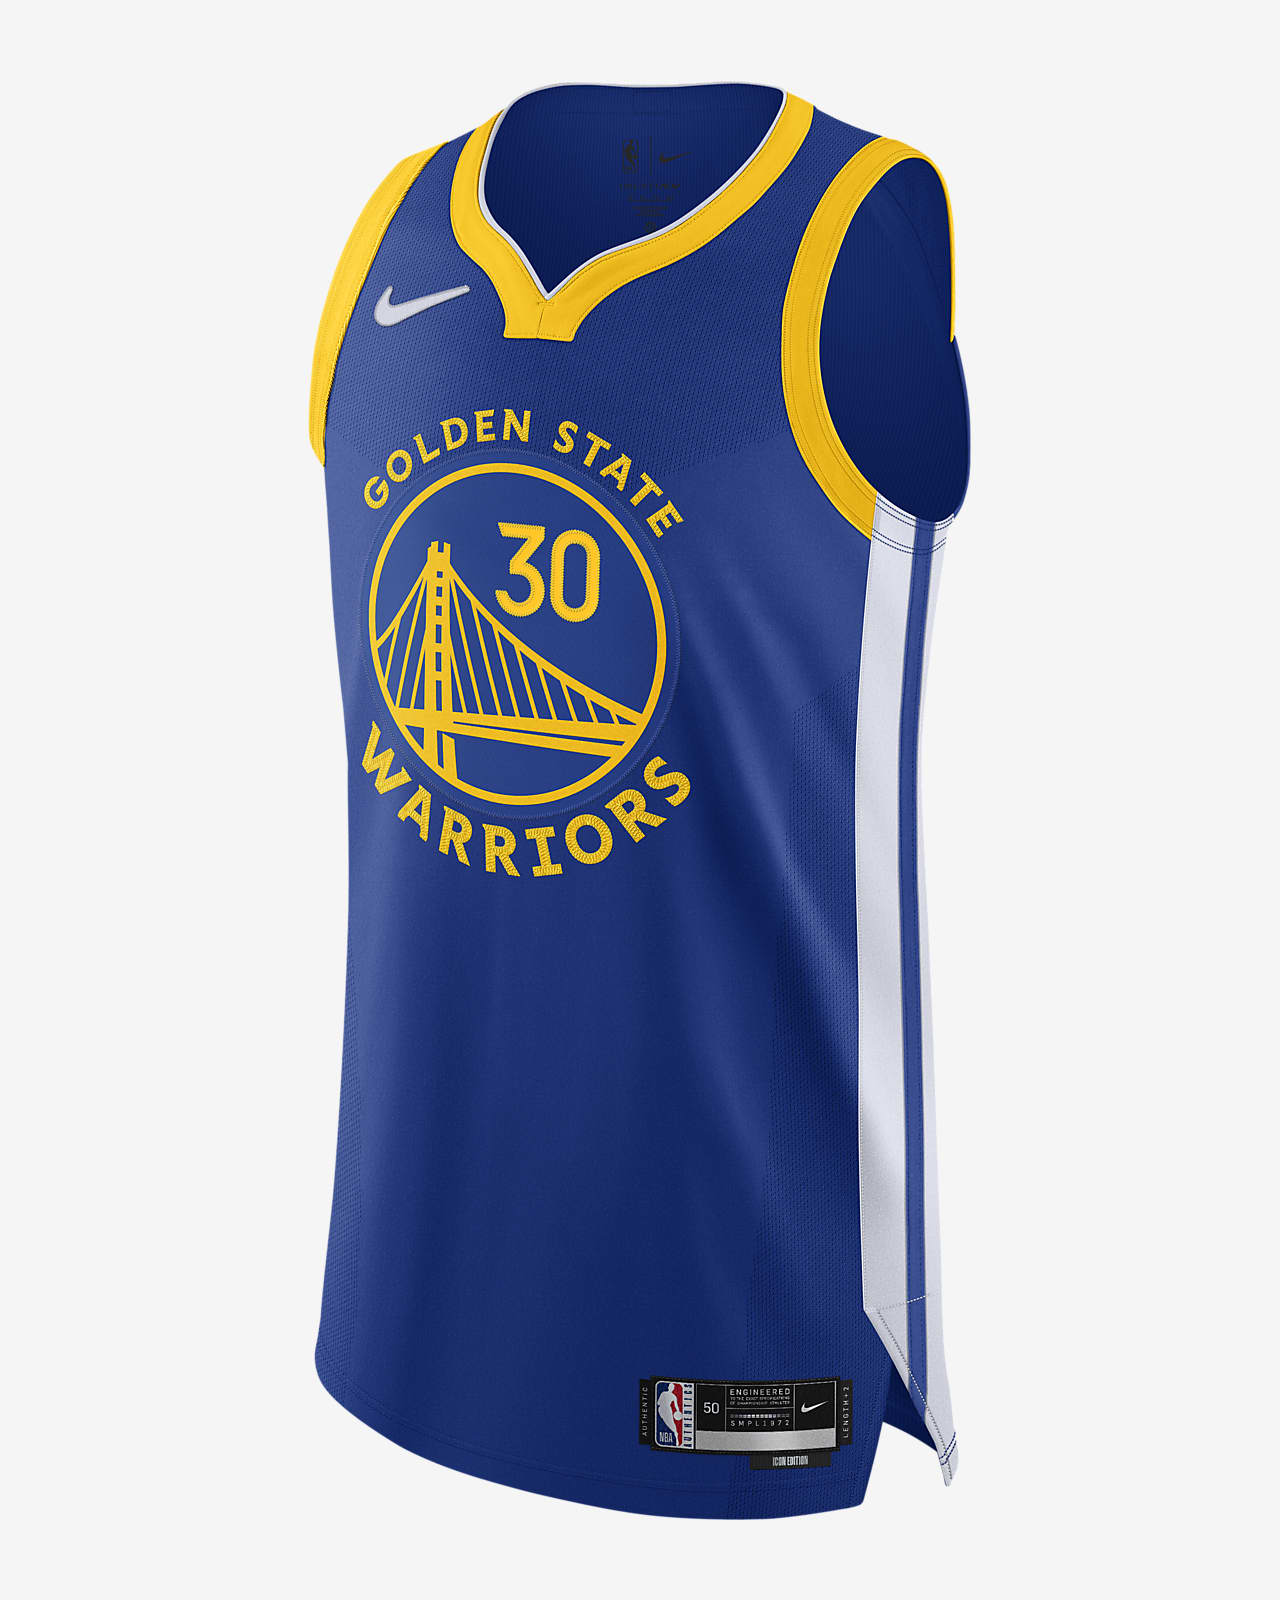 curry steph jersey